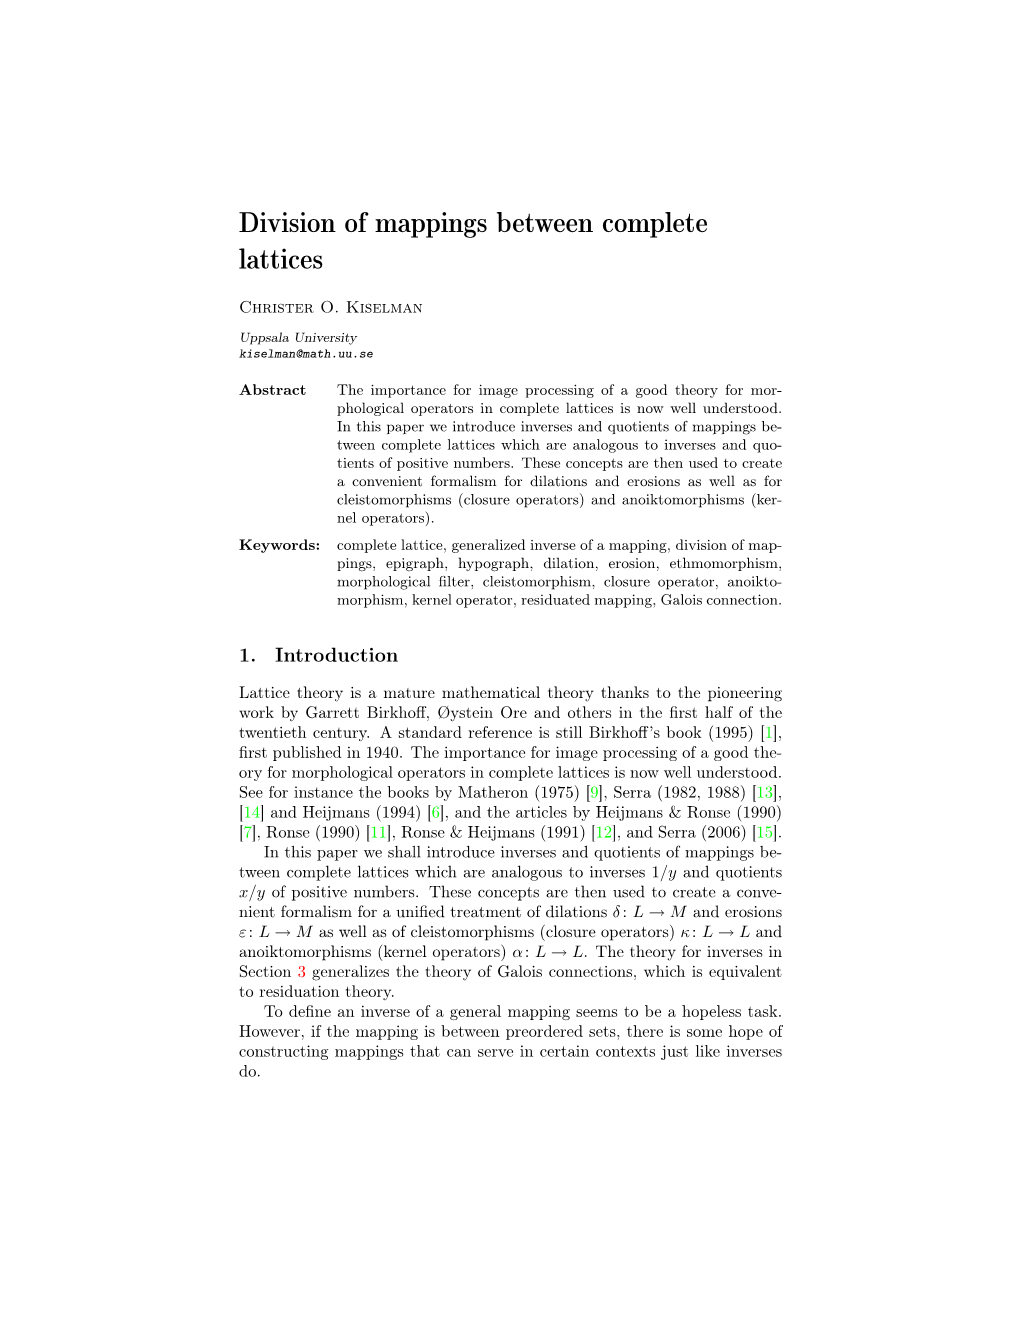 Division of Mappings Between Complete Lattices